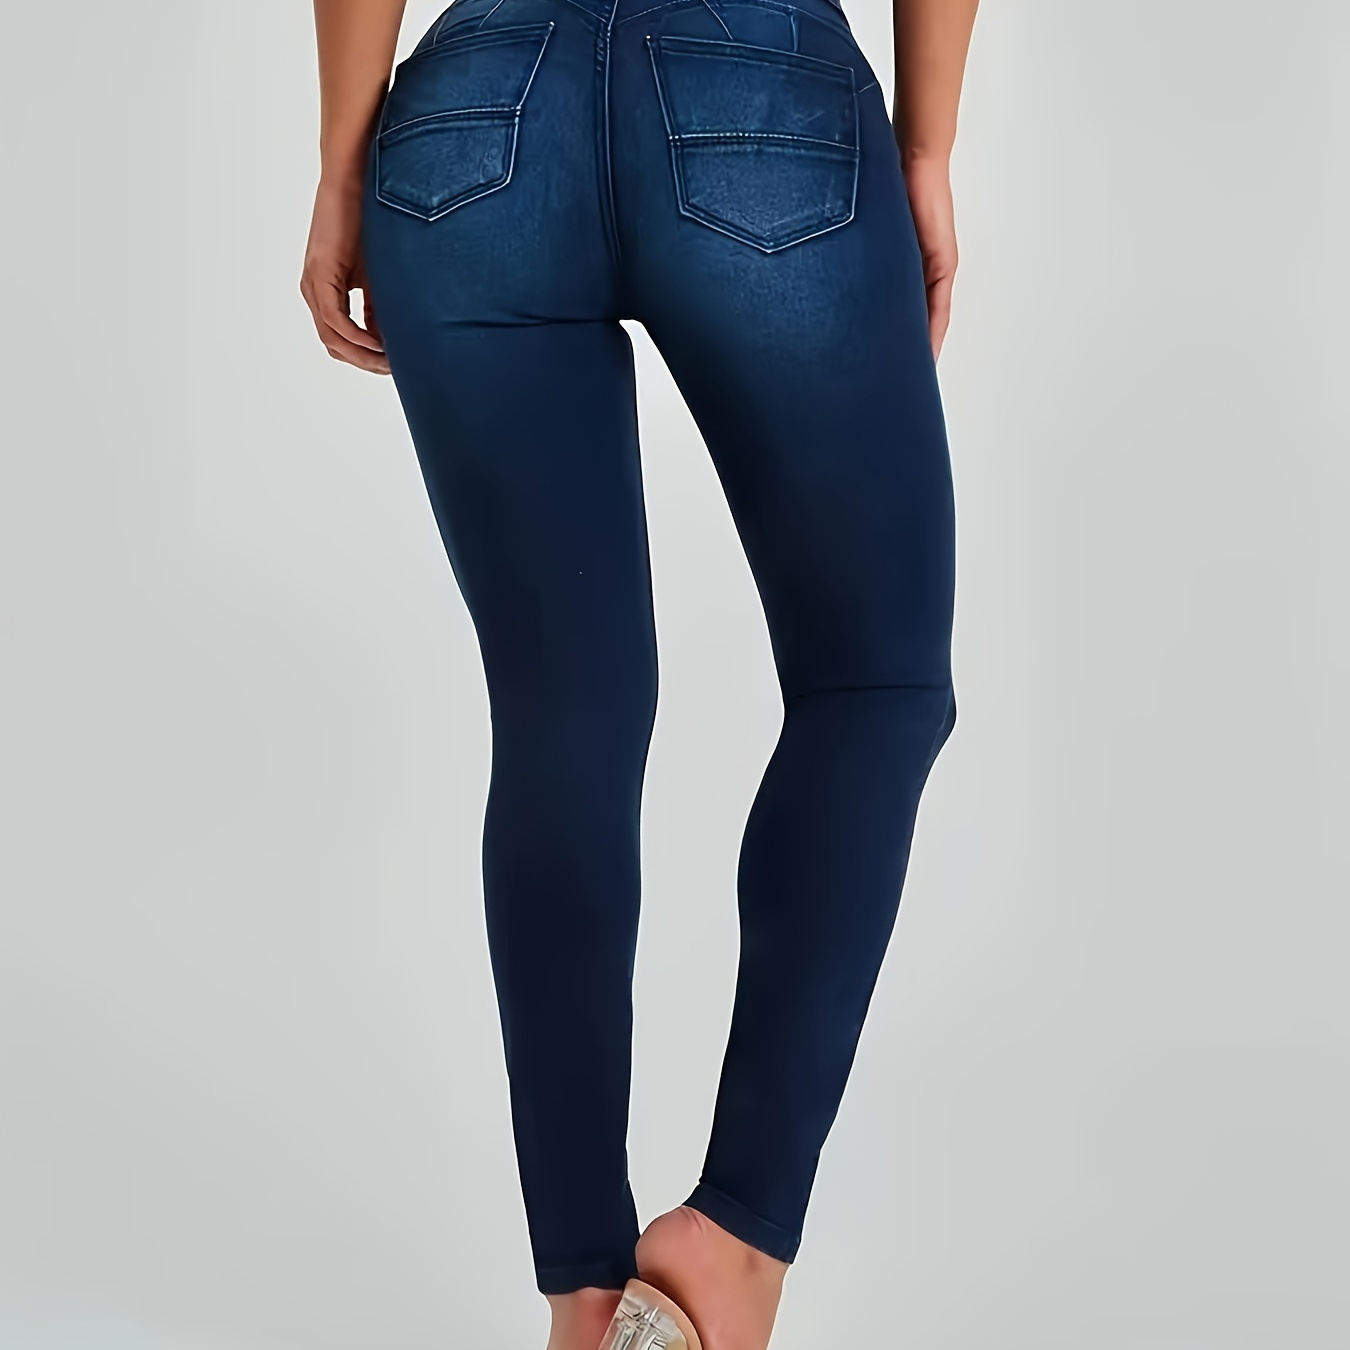 

Single-breasted High Rise Skinny Jeans, Plain Washed Blue Hot Denim Pants, Women's Denim Jeans & Clothing For Fall & Winter